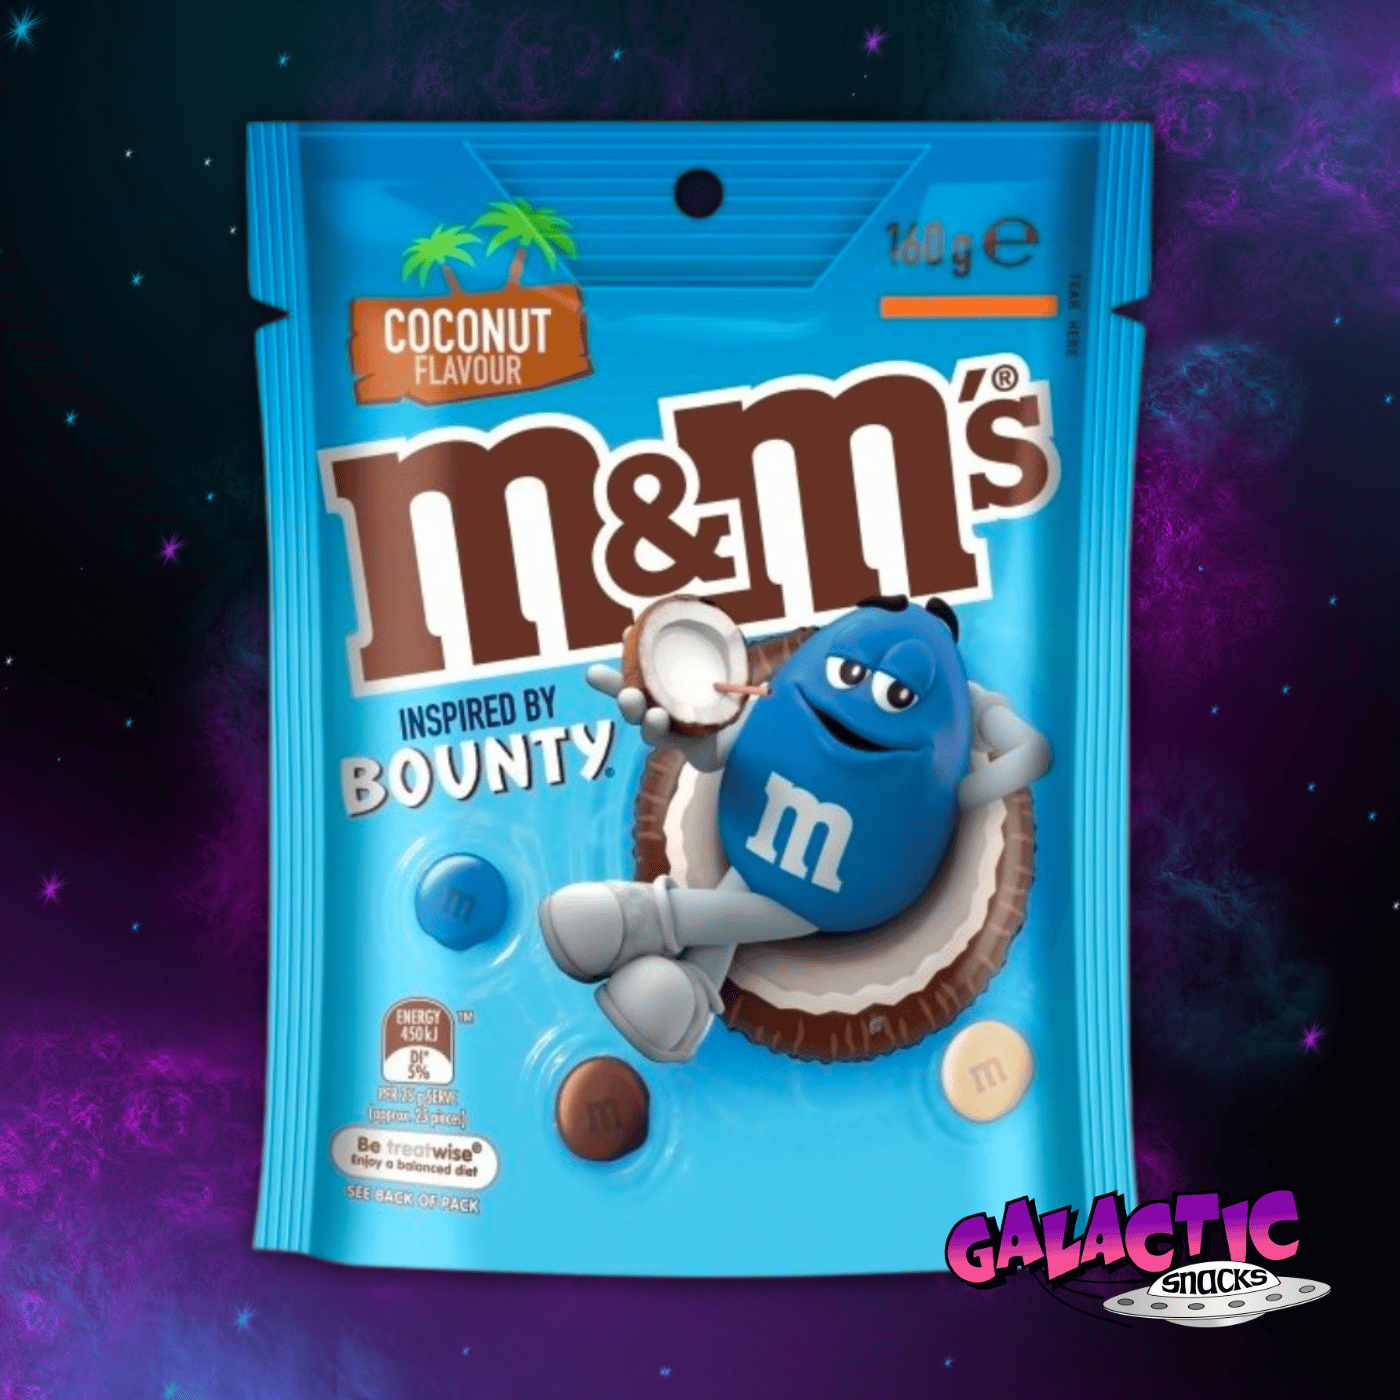 M&M's new coconut flavour inspired by Bounty chocolate bar